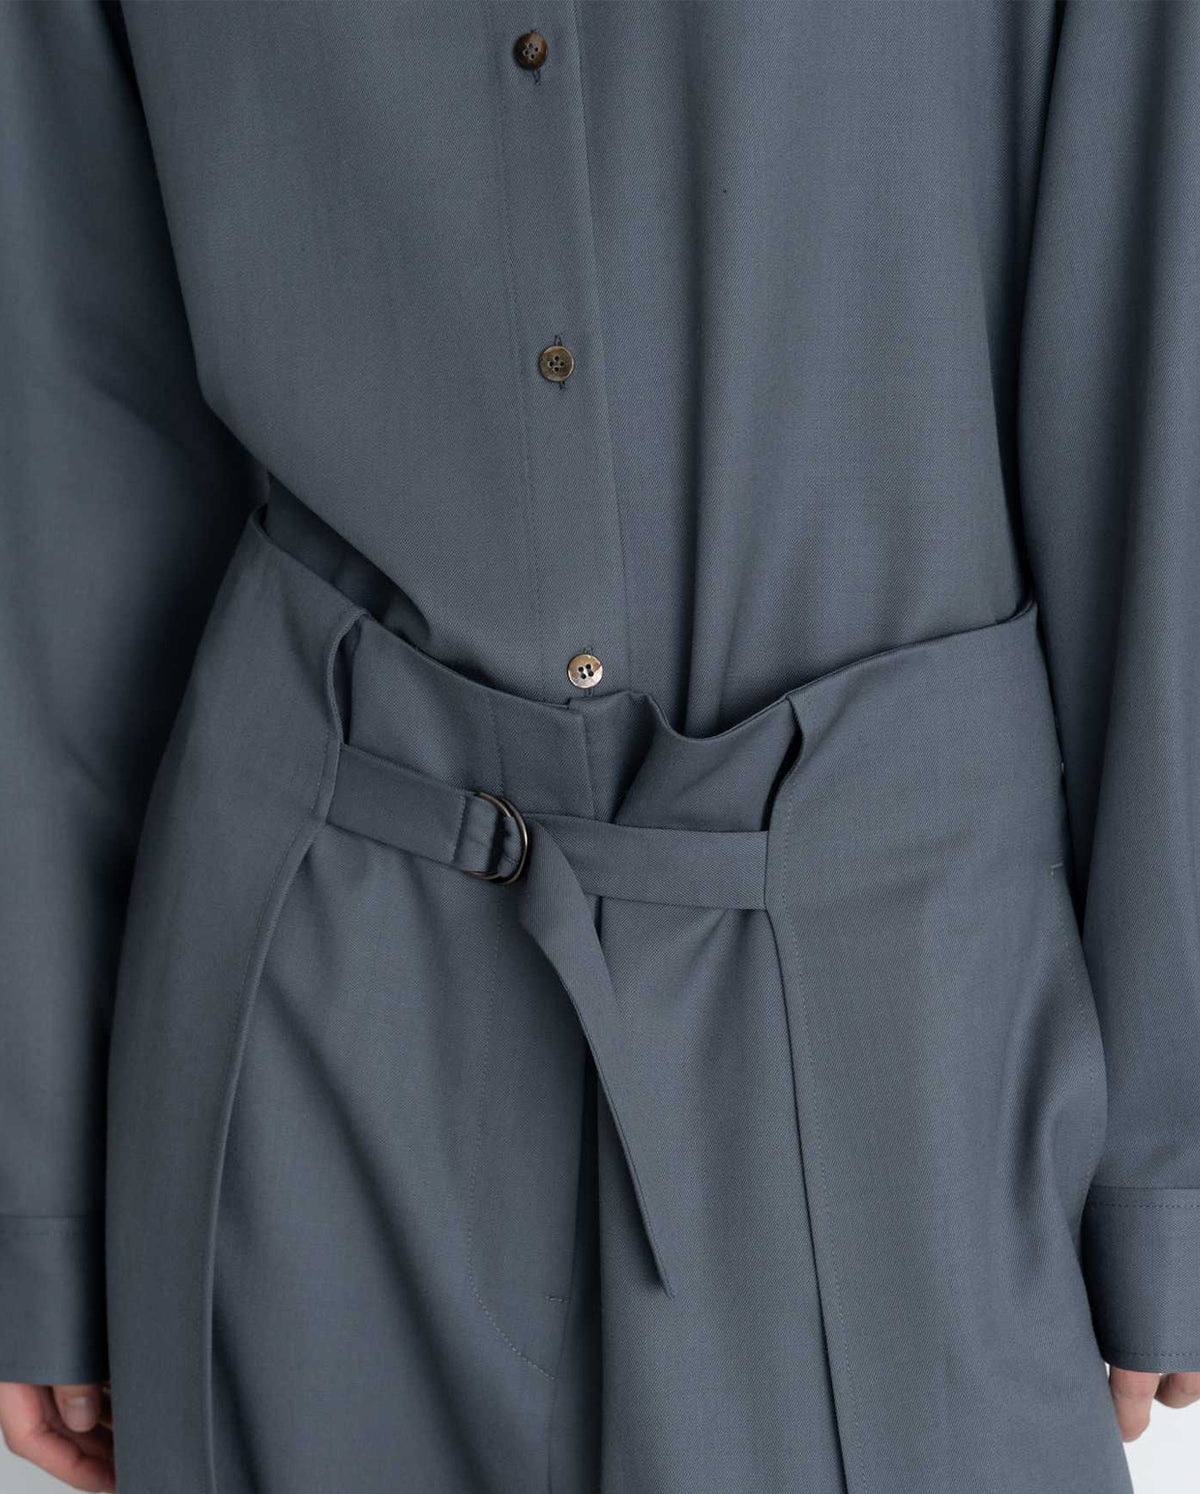 Middle Tight Belted Wool Pants - Blue